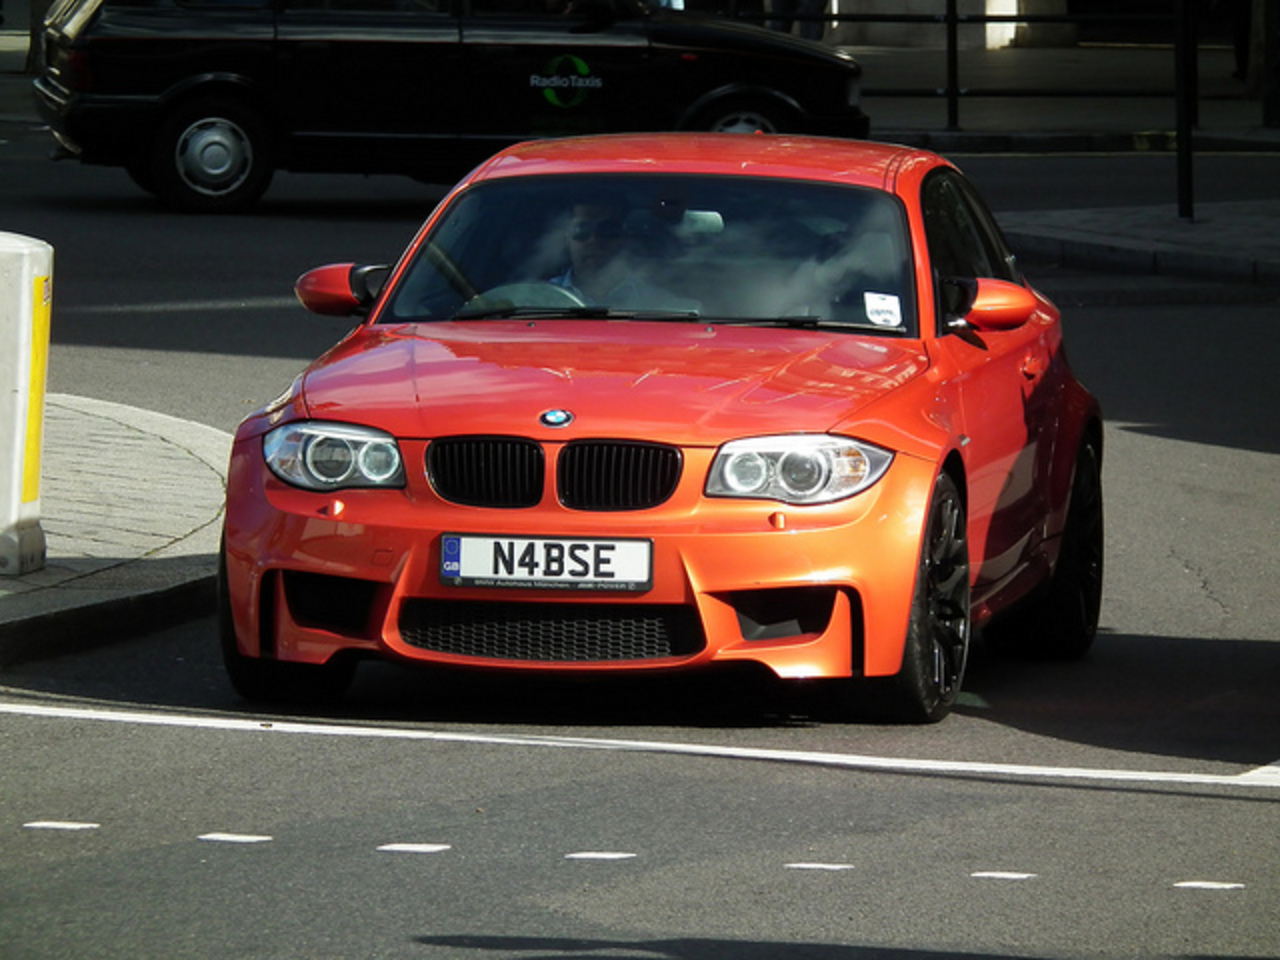 BMW 1 Series M Coupe | Flickr - Photo Sharing!